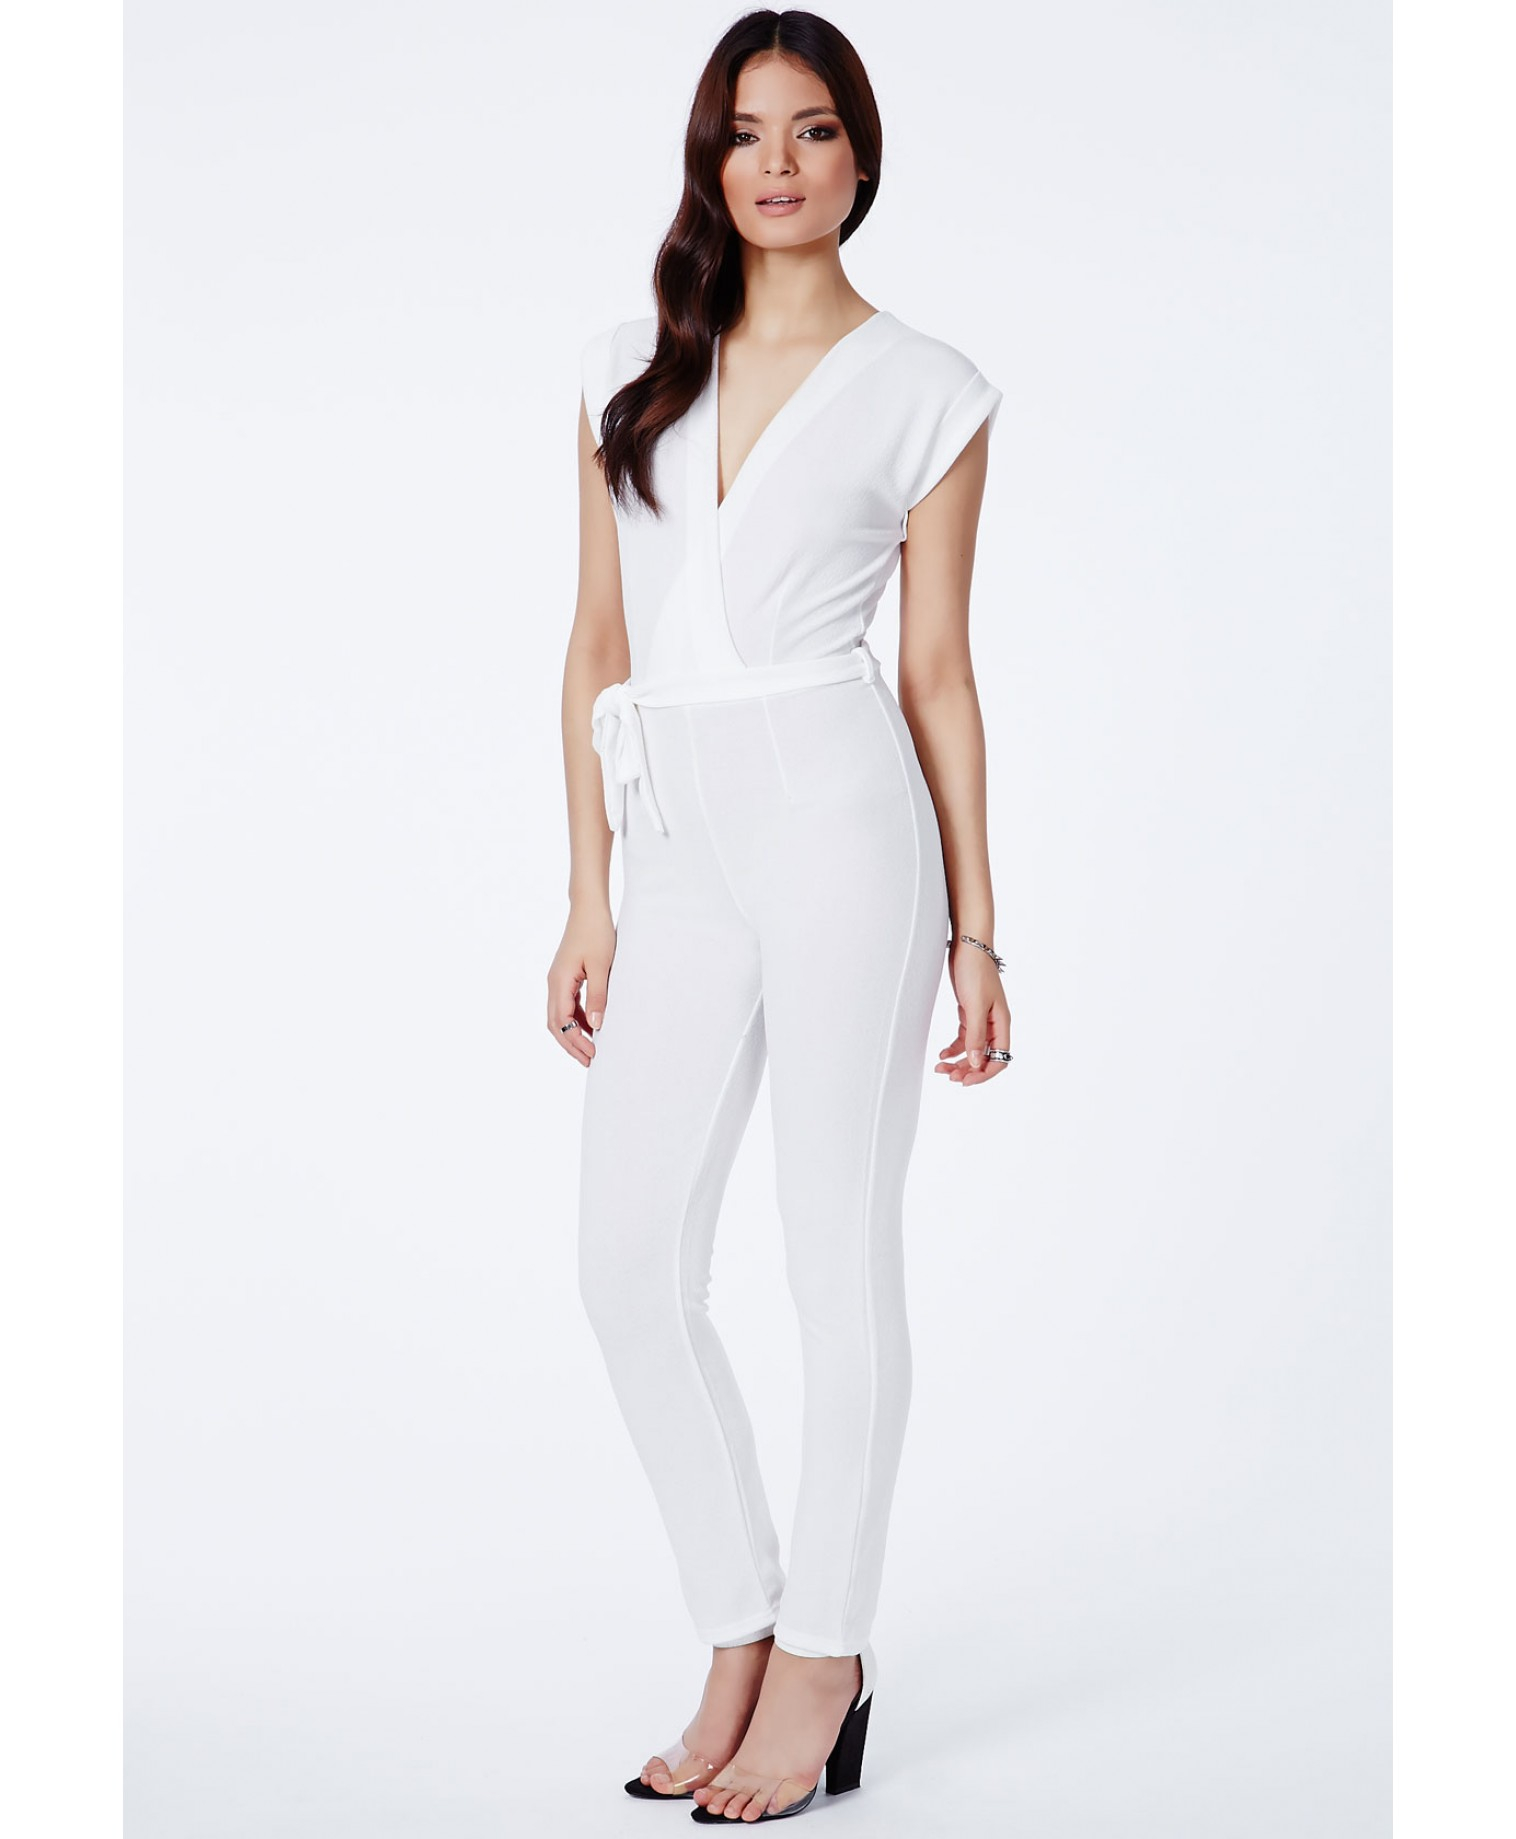 Lyst - Missguided Makaila Tie Waist Wrapover Jumpsuit In White in White